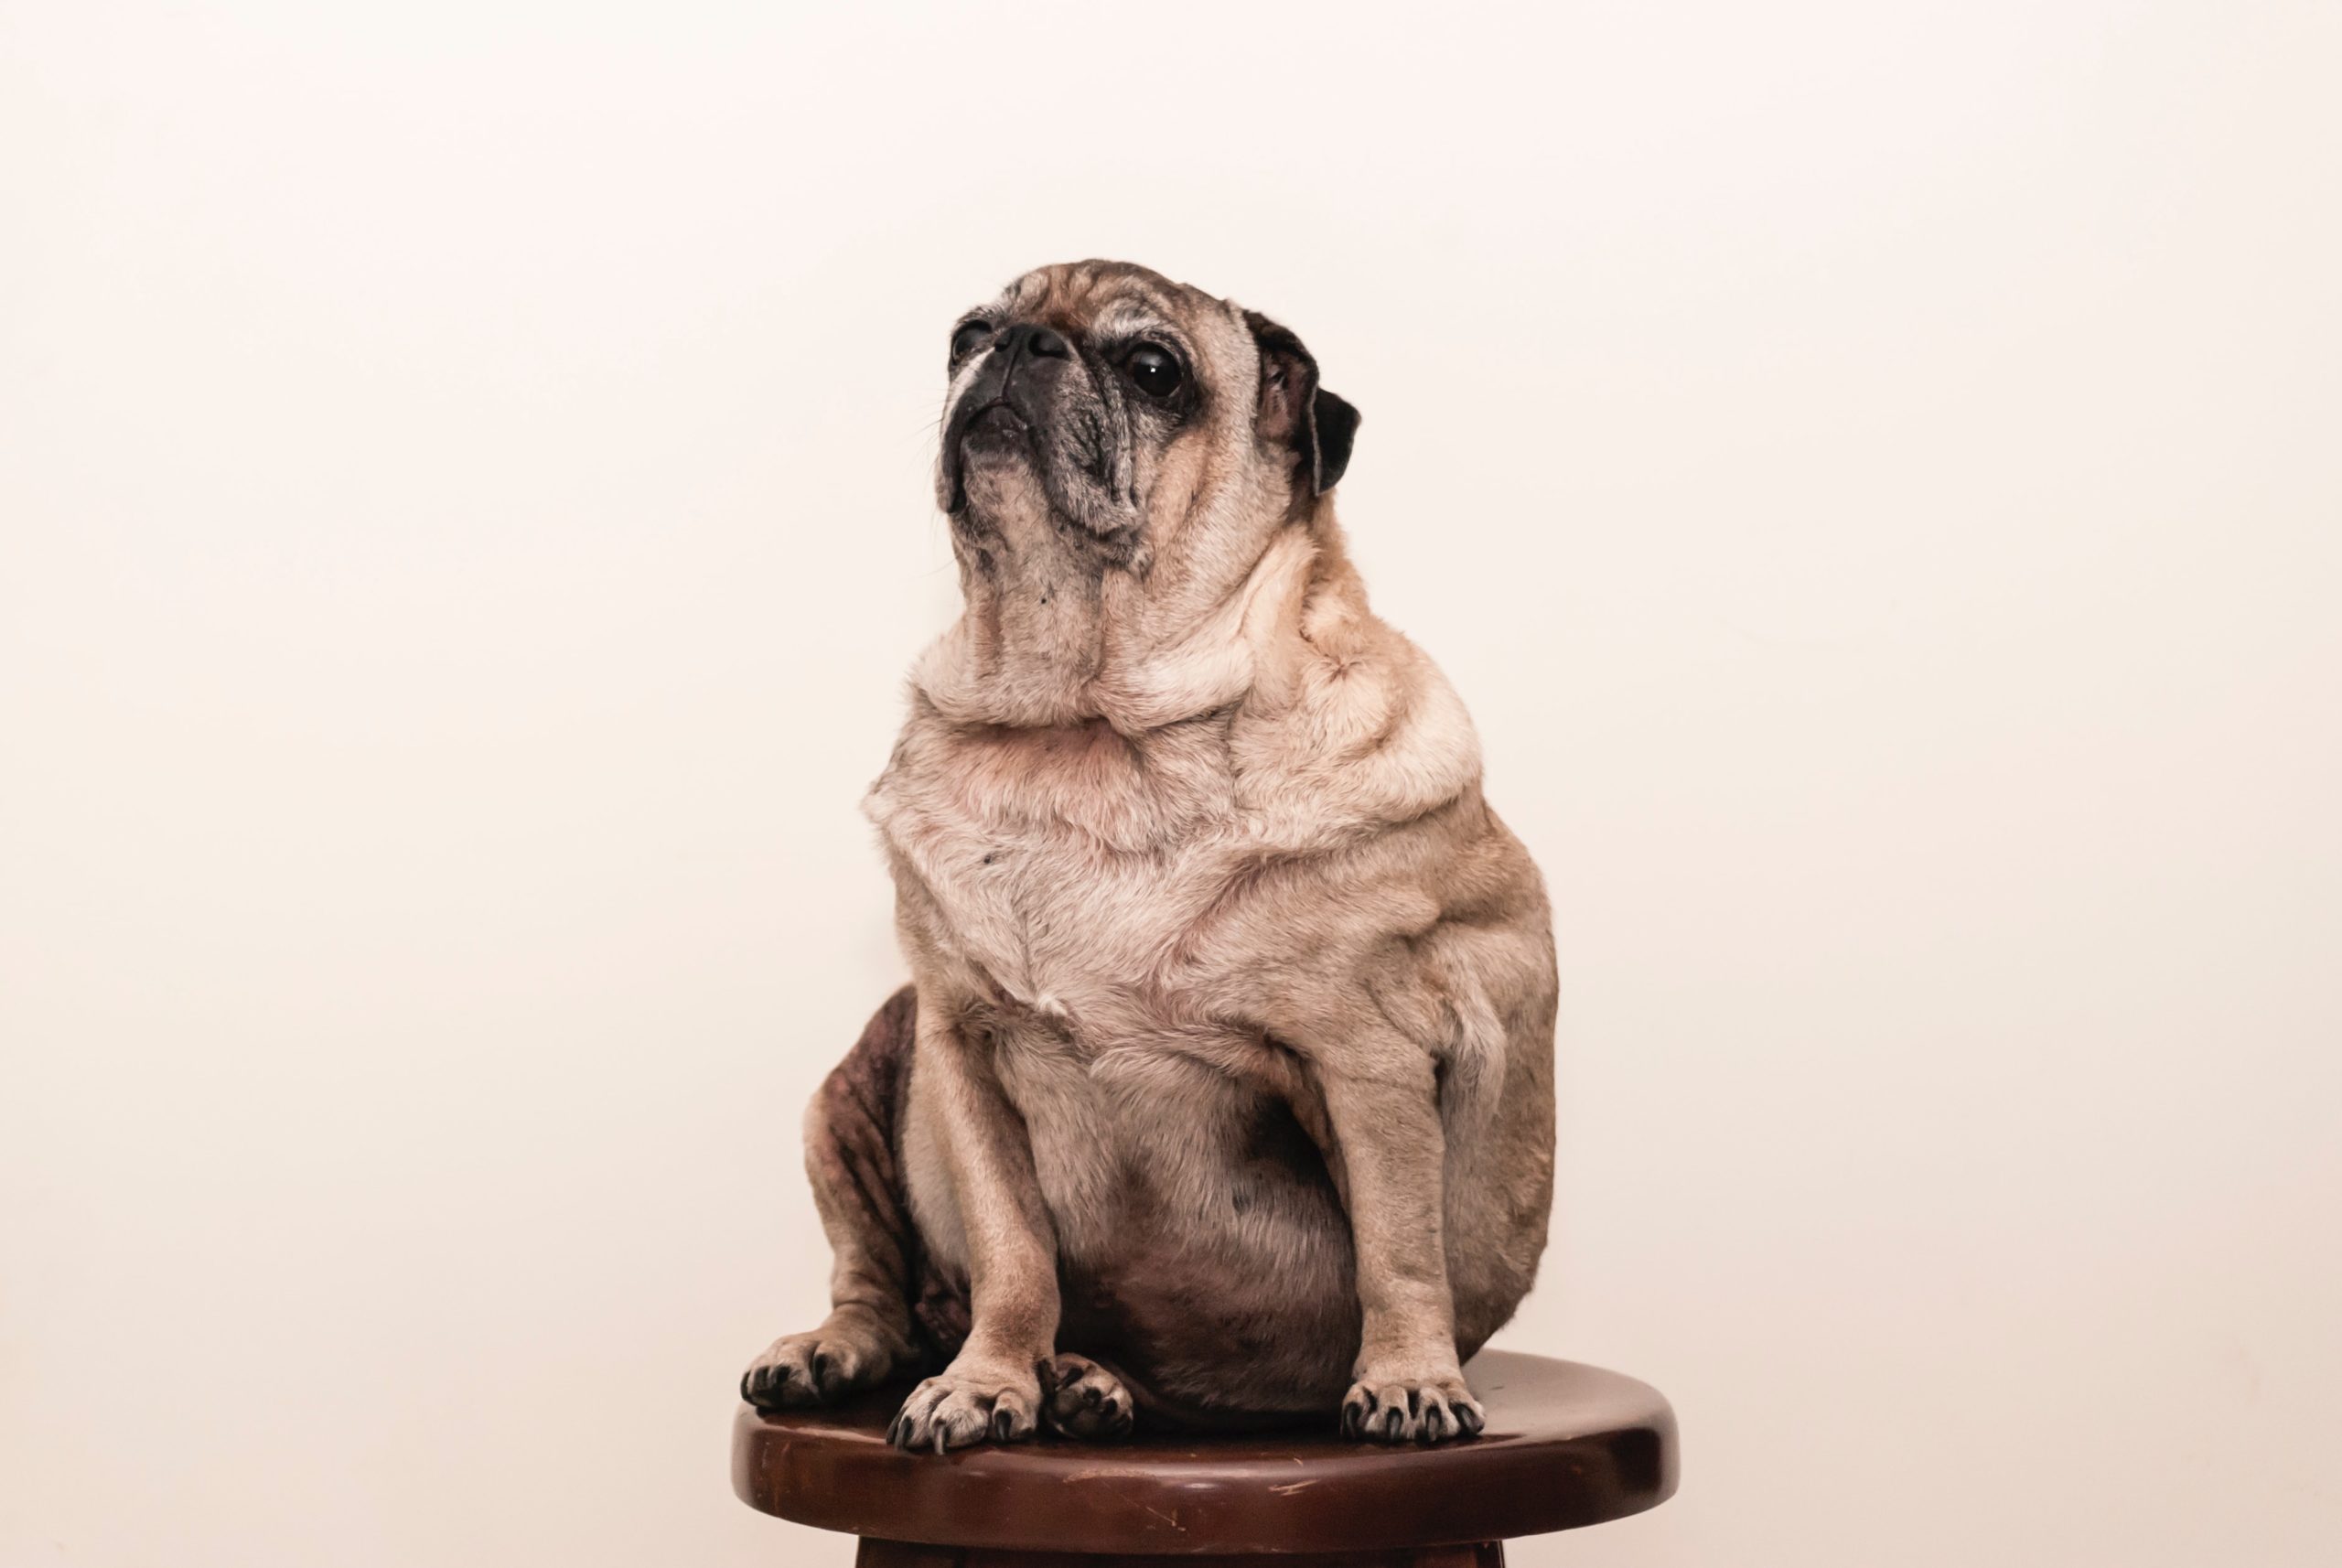 Canine well-being: What’s the right weight for my dog?